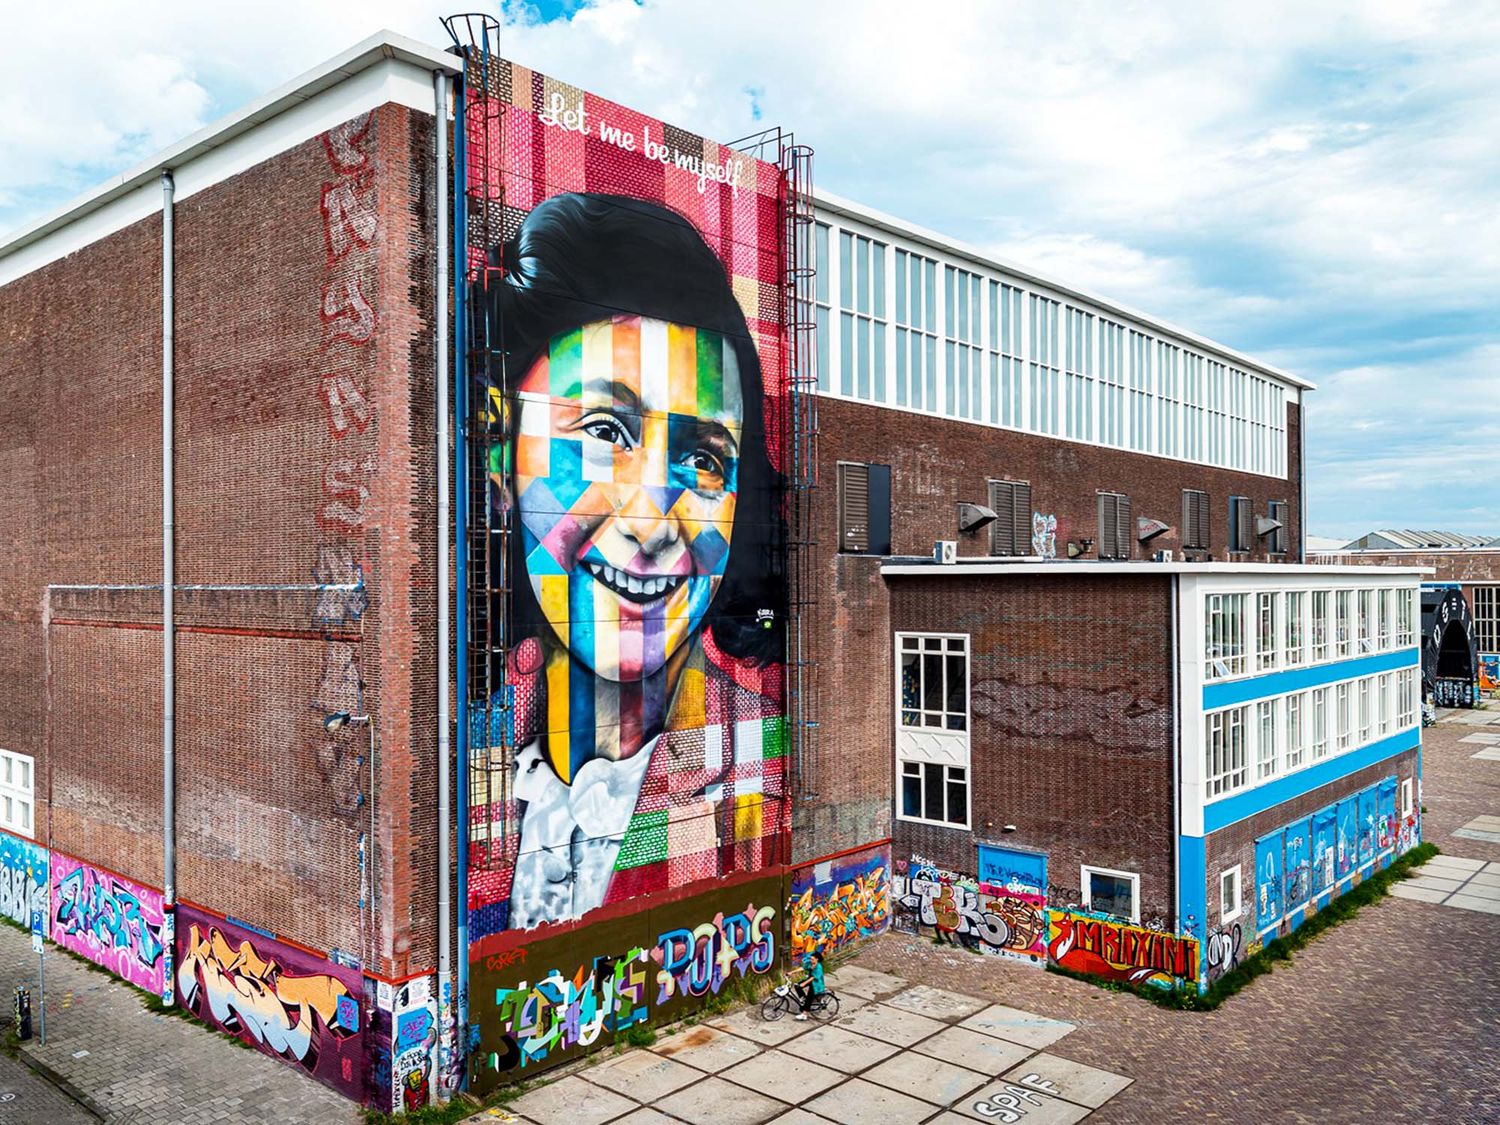 Latest museum dedicated to Graffiti and Street Art, STRAAT is probably the most spectacular thanks to its gigantic artworks and its location in an historical shipyard of Amsterdam (@Straat Museum).